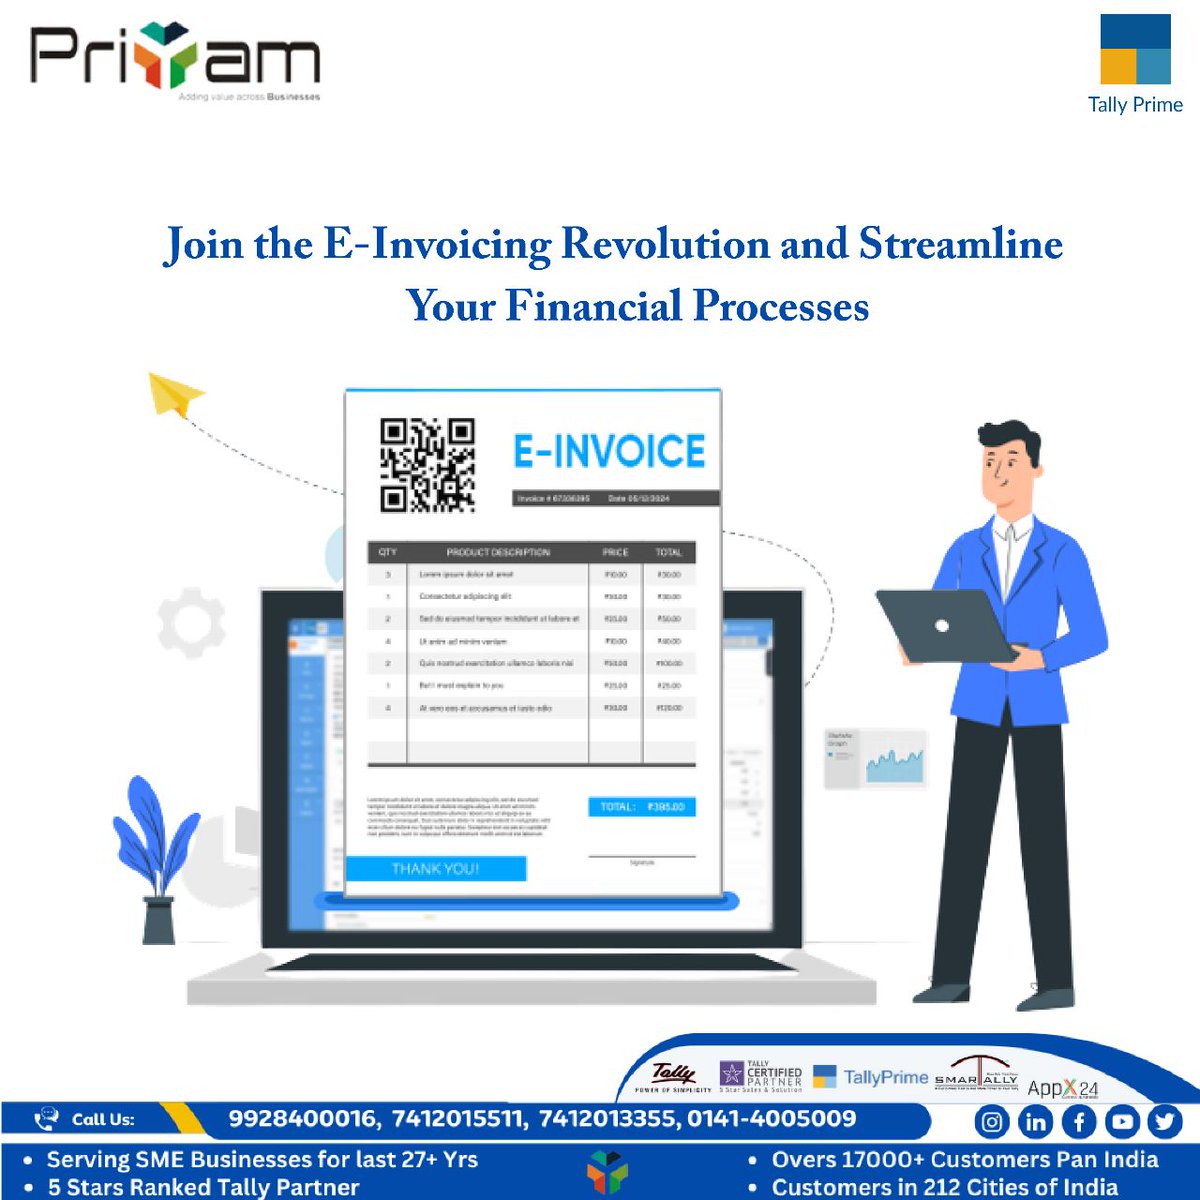 💻📊 Join the E-Invoicing Revolution! Streamline Your Financial Processes and Embrace a New Era of Efficiency and Productivity! 🌟💼
.
.
#TallyOnCloud #BusinessSolutions #EfficiencyBoost #FlexibleAccess #SecureInfrastructure #ElevateYourBusiness #TallyPrime #TallyPrime3.0